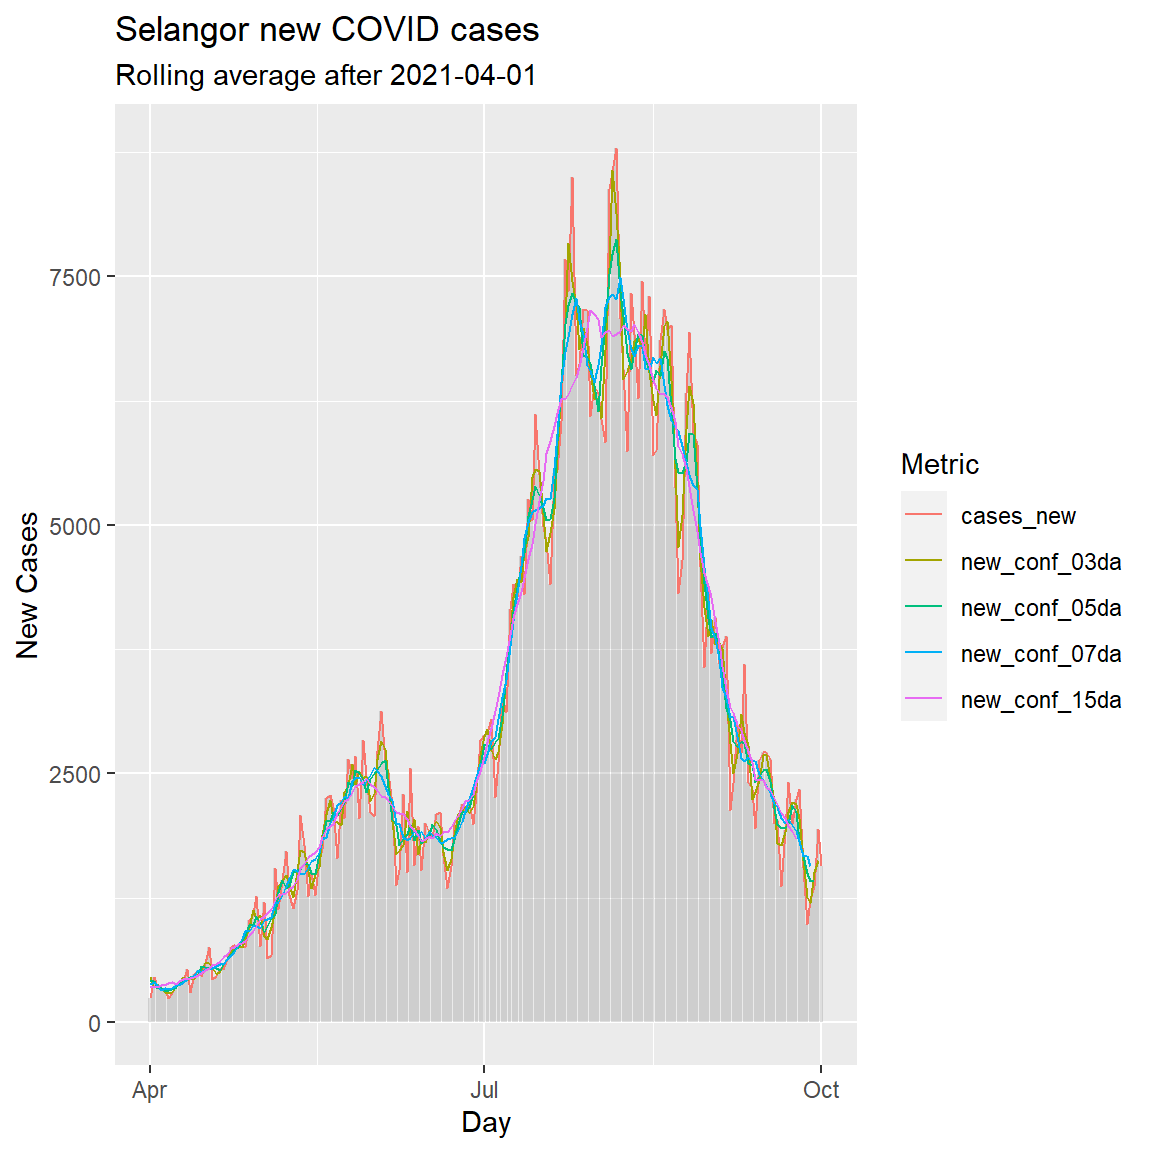 Simple column bar graph of new Covid cases with various rolling averages